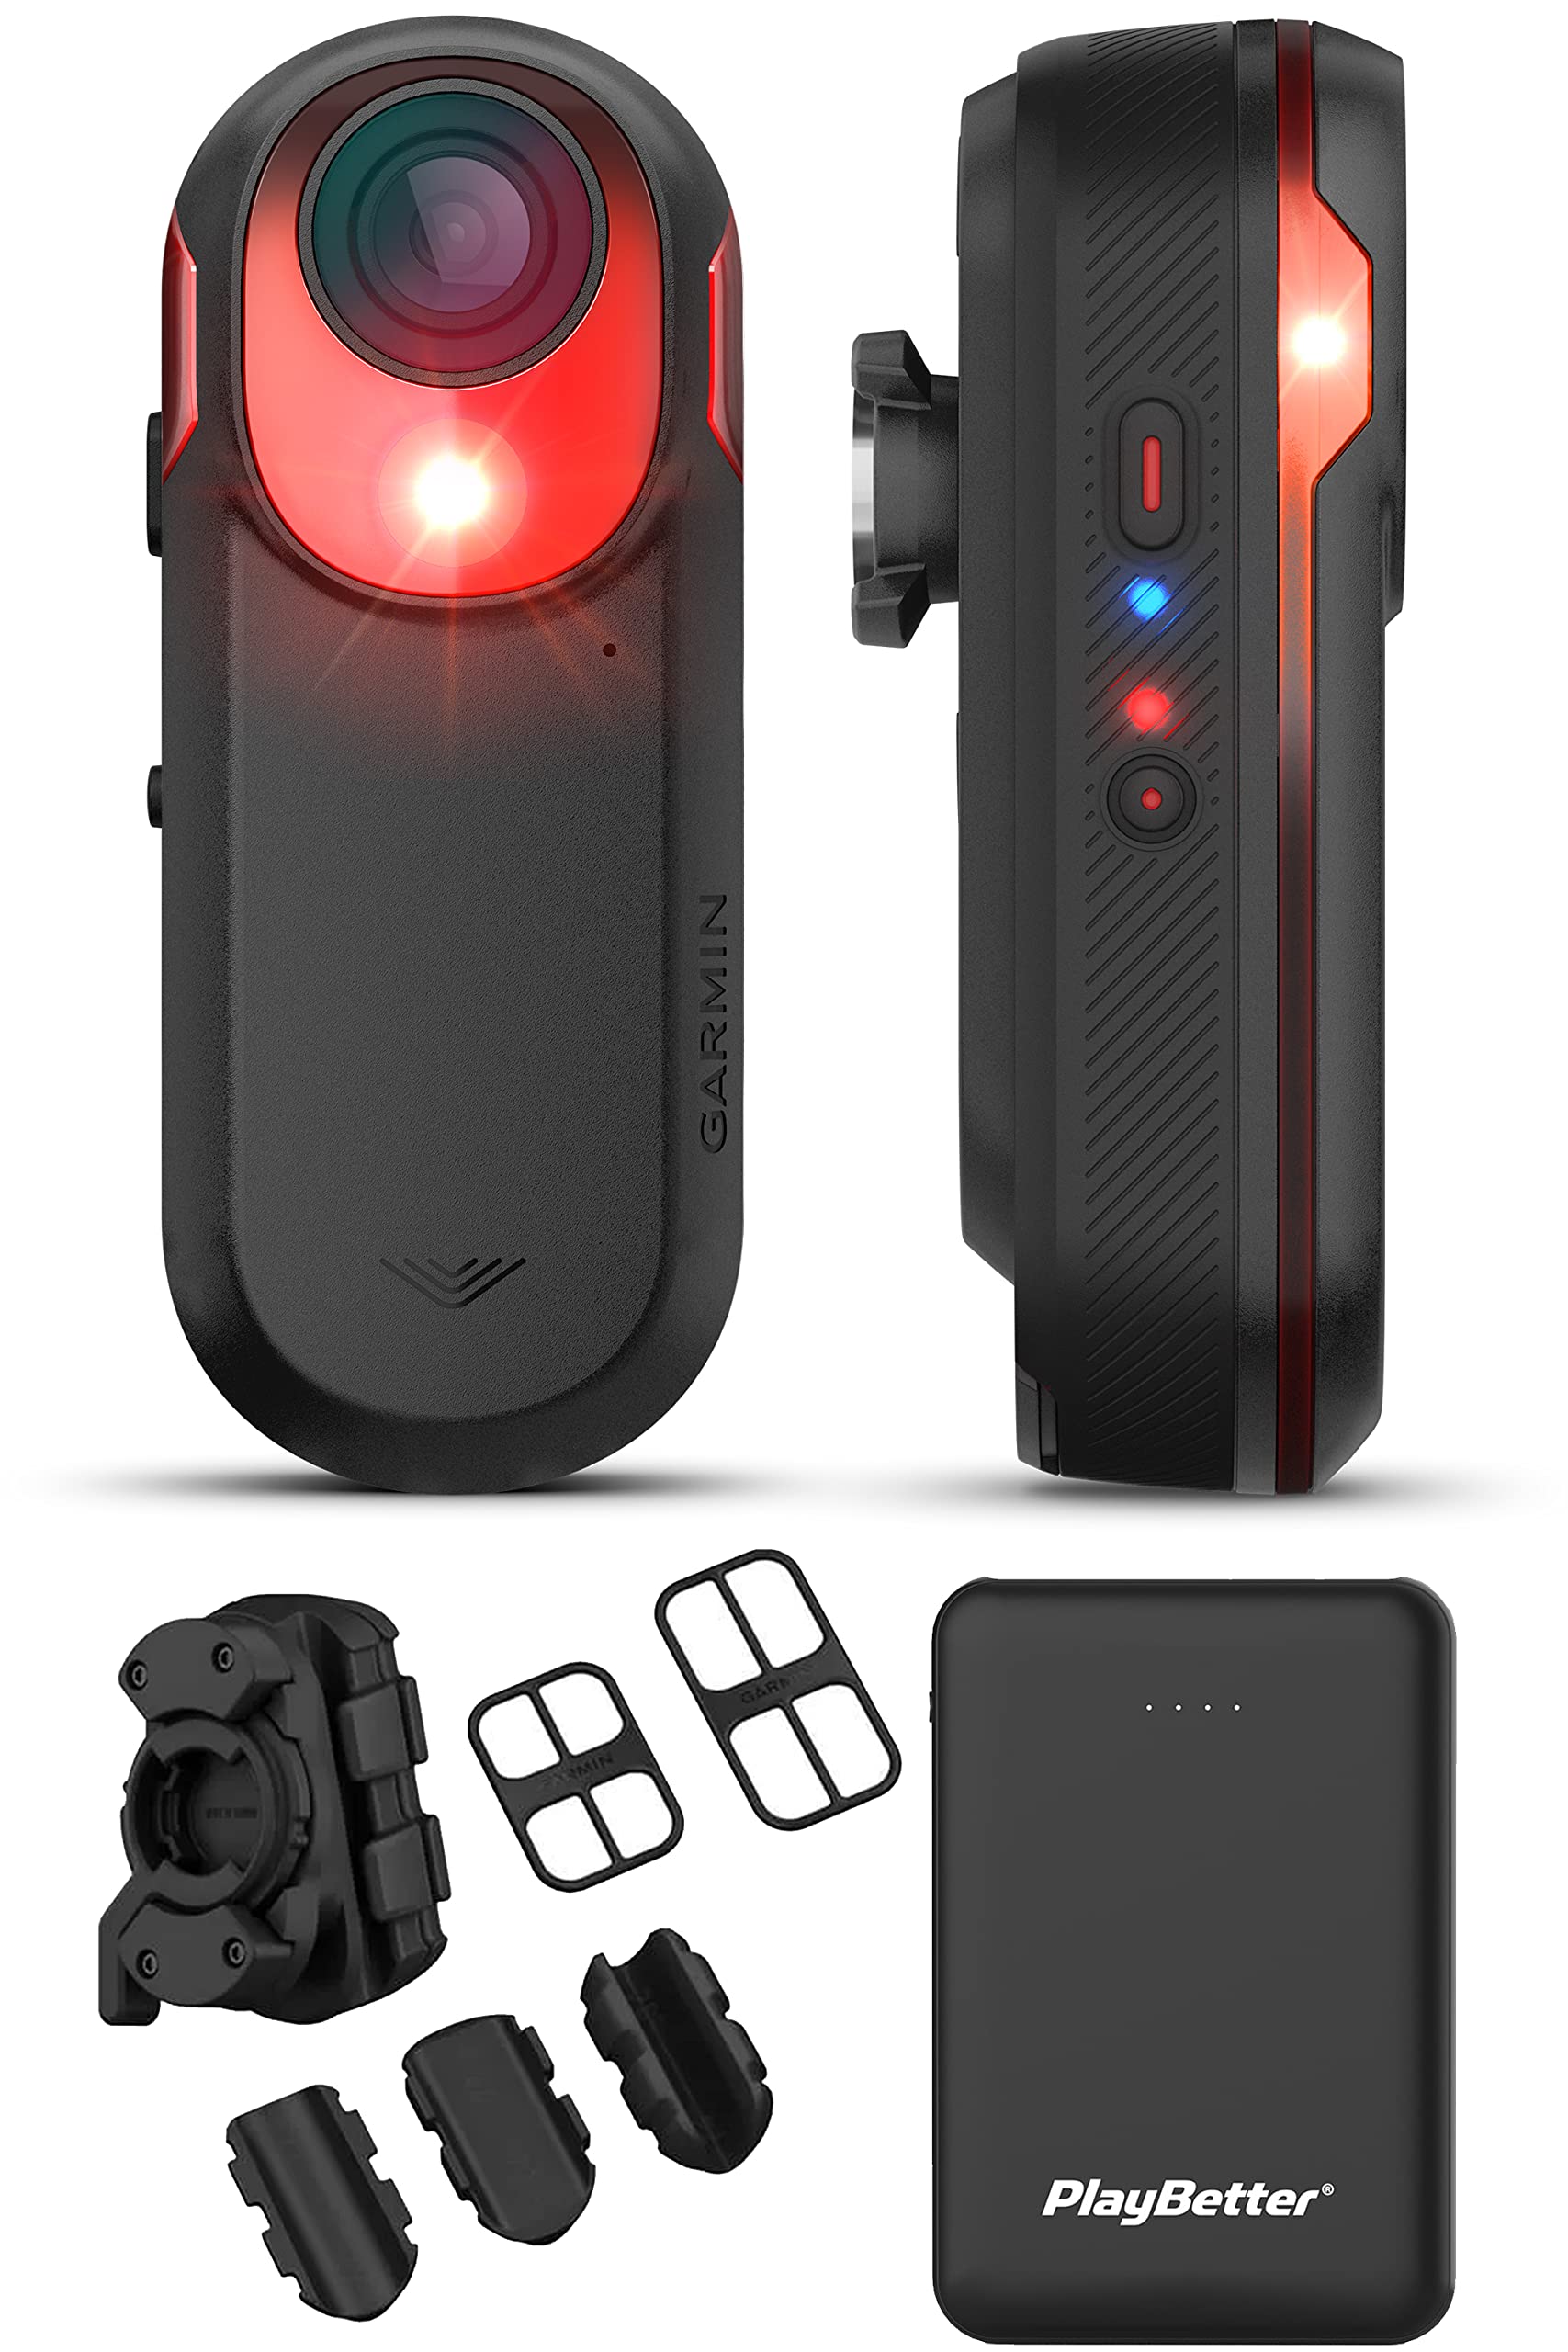 Garmin Varia Rearview Radar Tail Light Bundle with PlayBetter Portable Charger | Essential Bike Safety Gadget for Riders